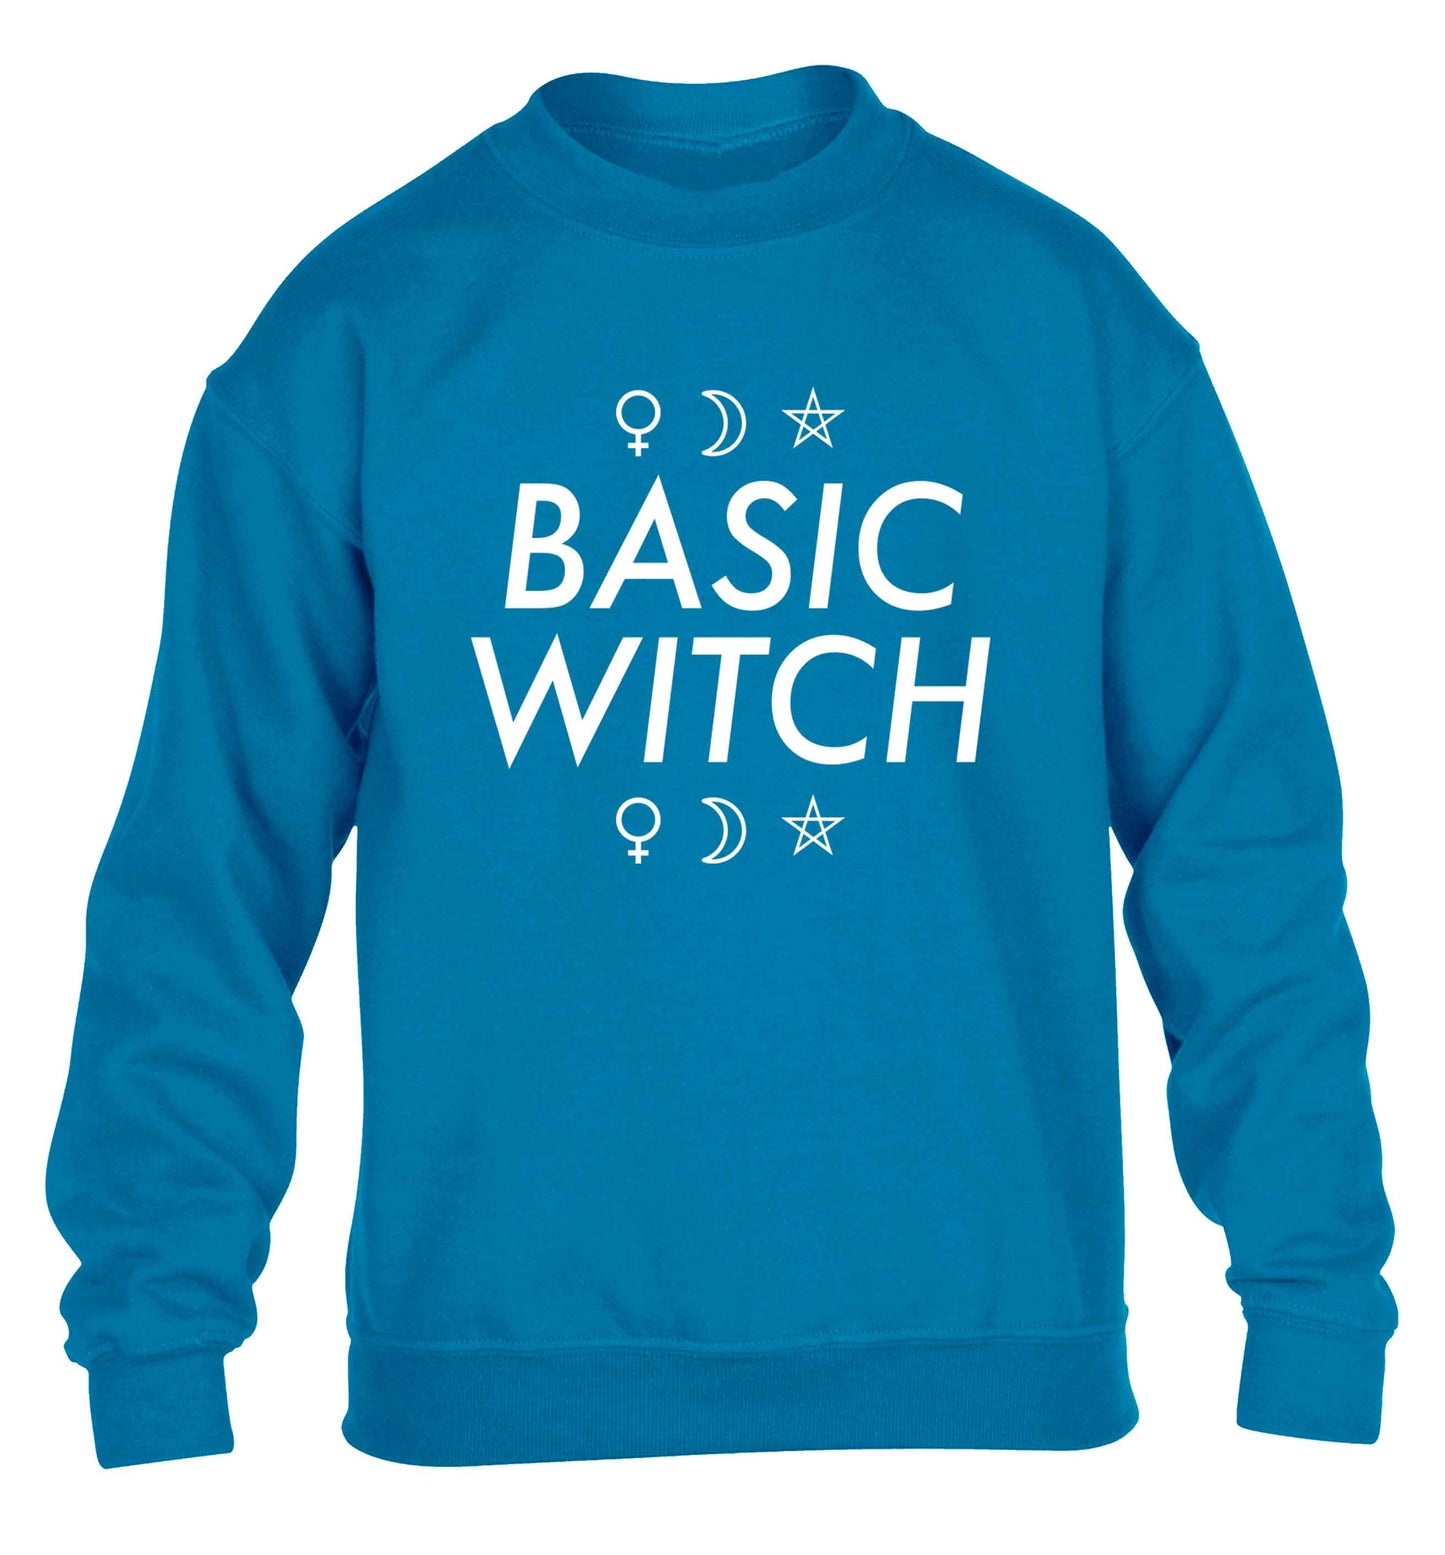 Basic witch 1 children's blue sweater 12-13 Years